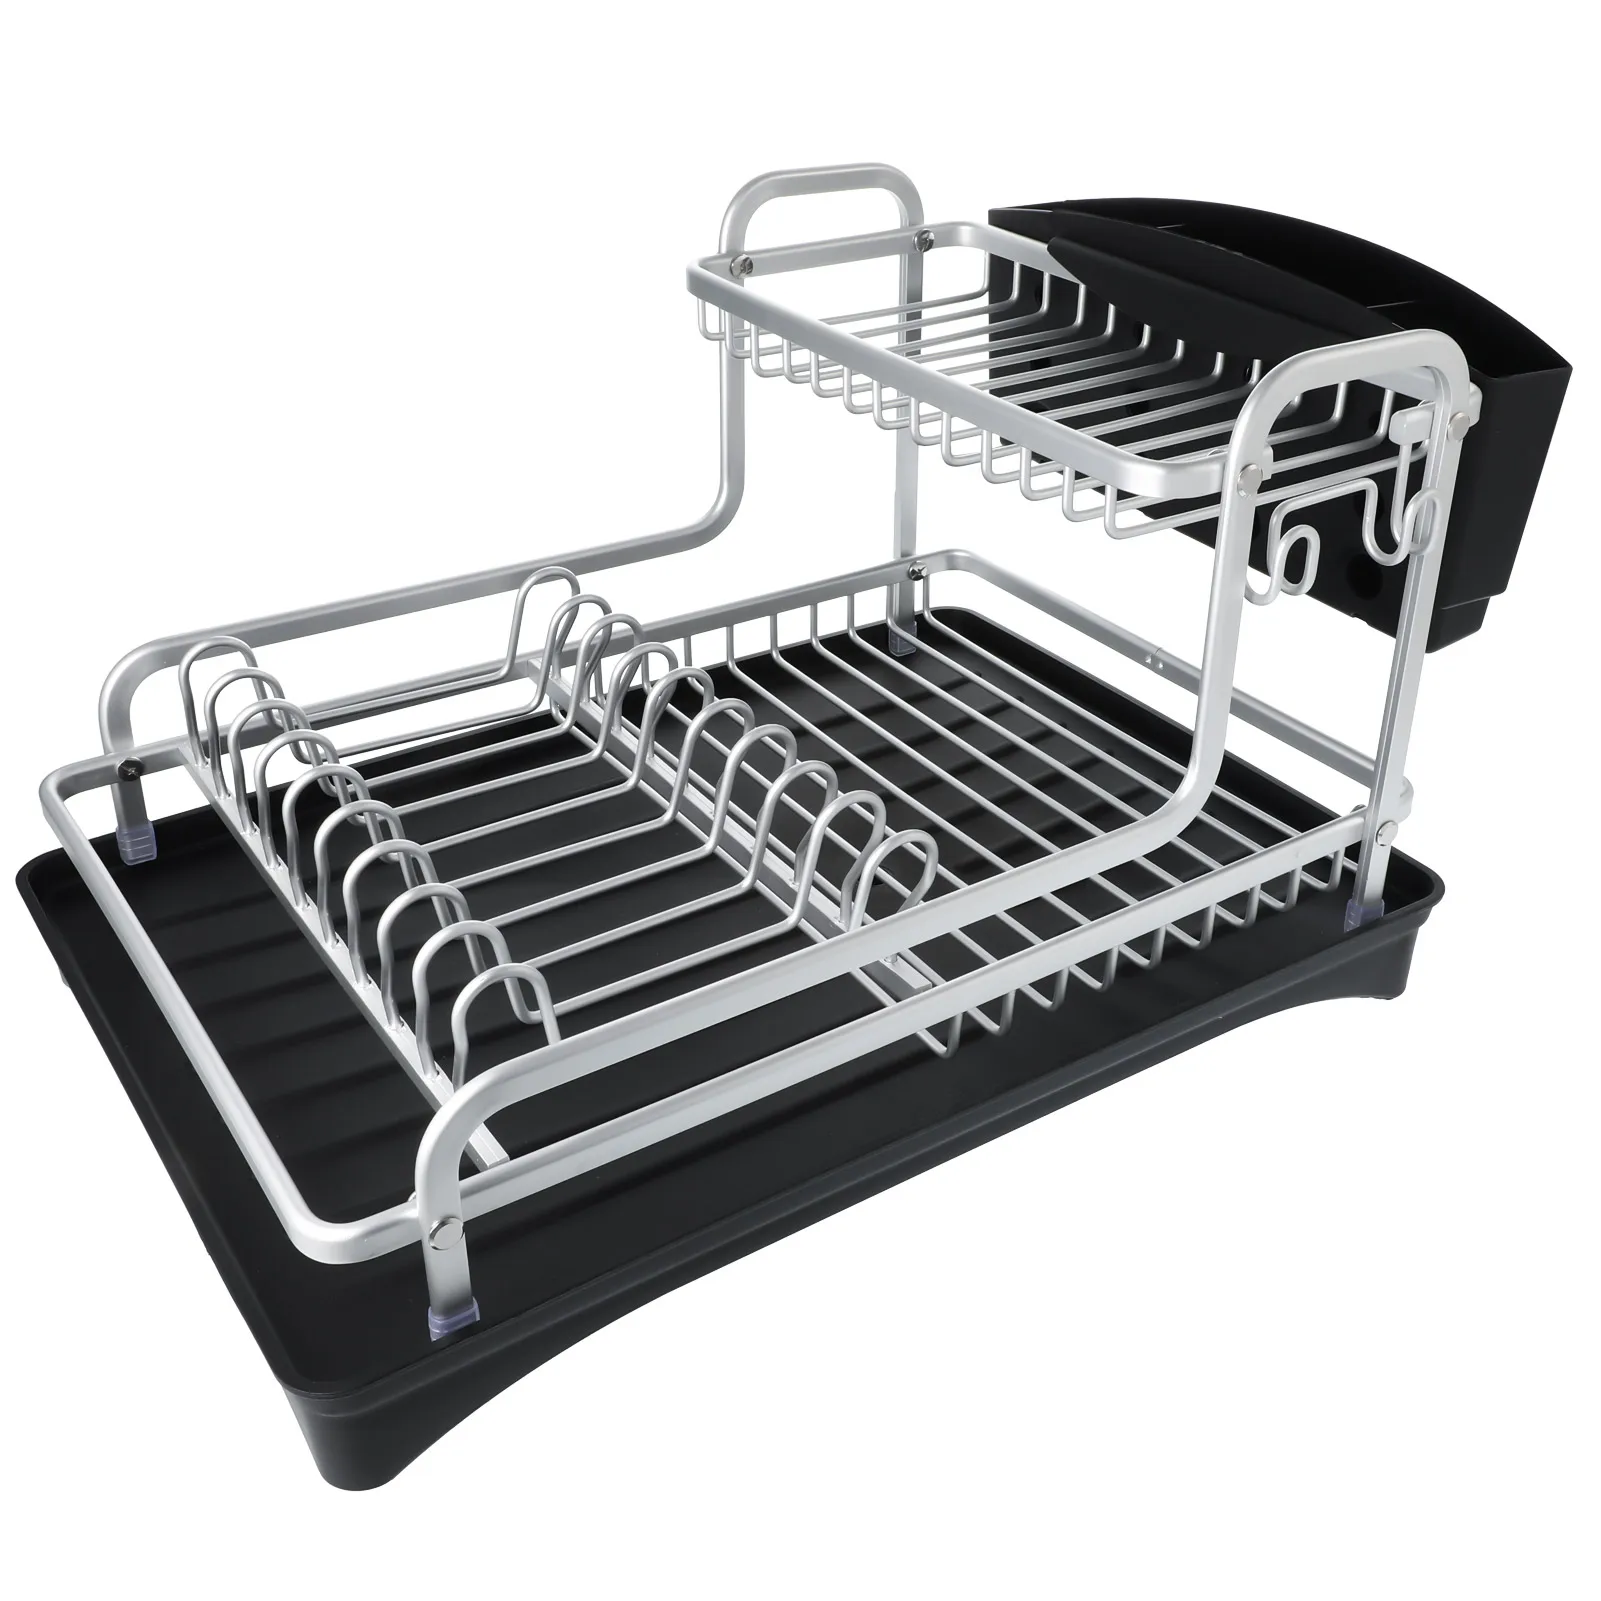 Double Layer Aluminum Alloy Sink Stand Dish Drying Rack Kitchen Organizer Drainer Plate Holder Cutlery Storage Shelf Accessories